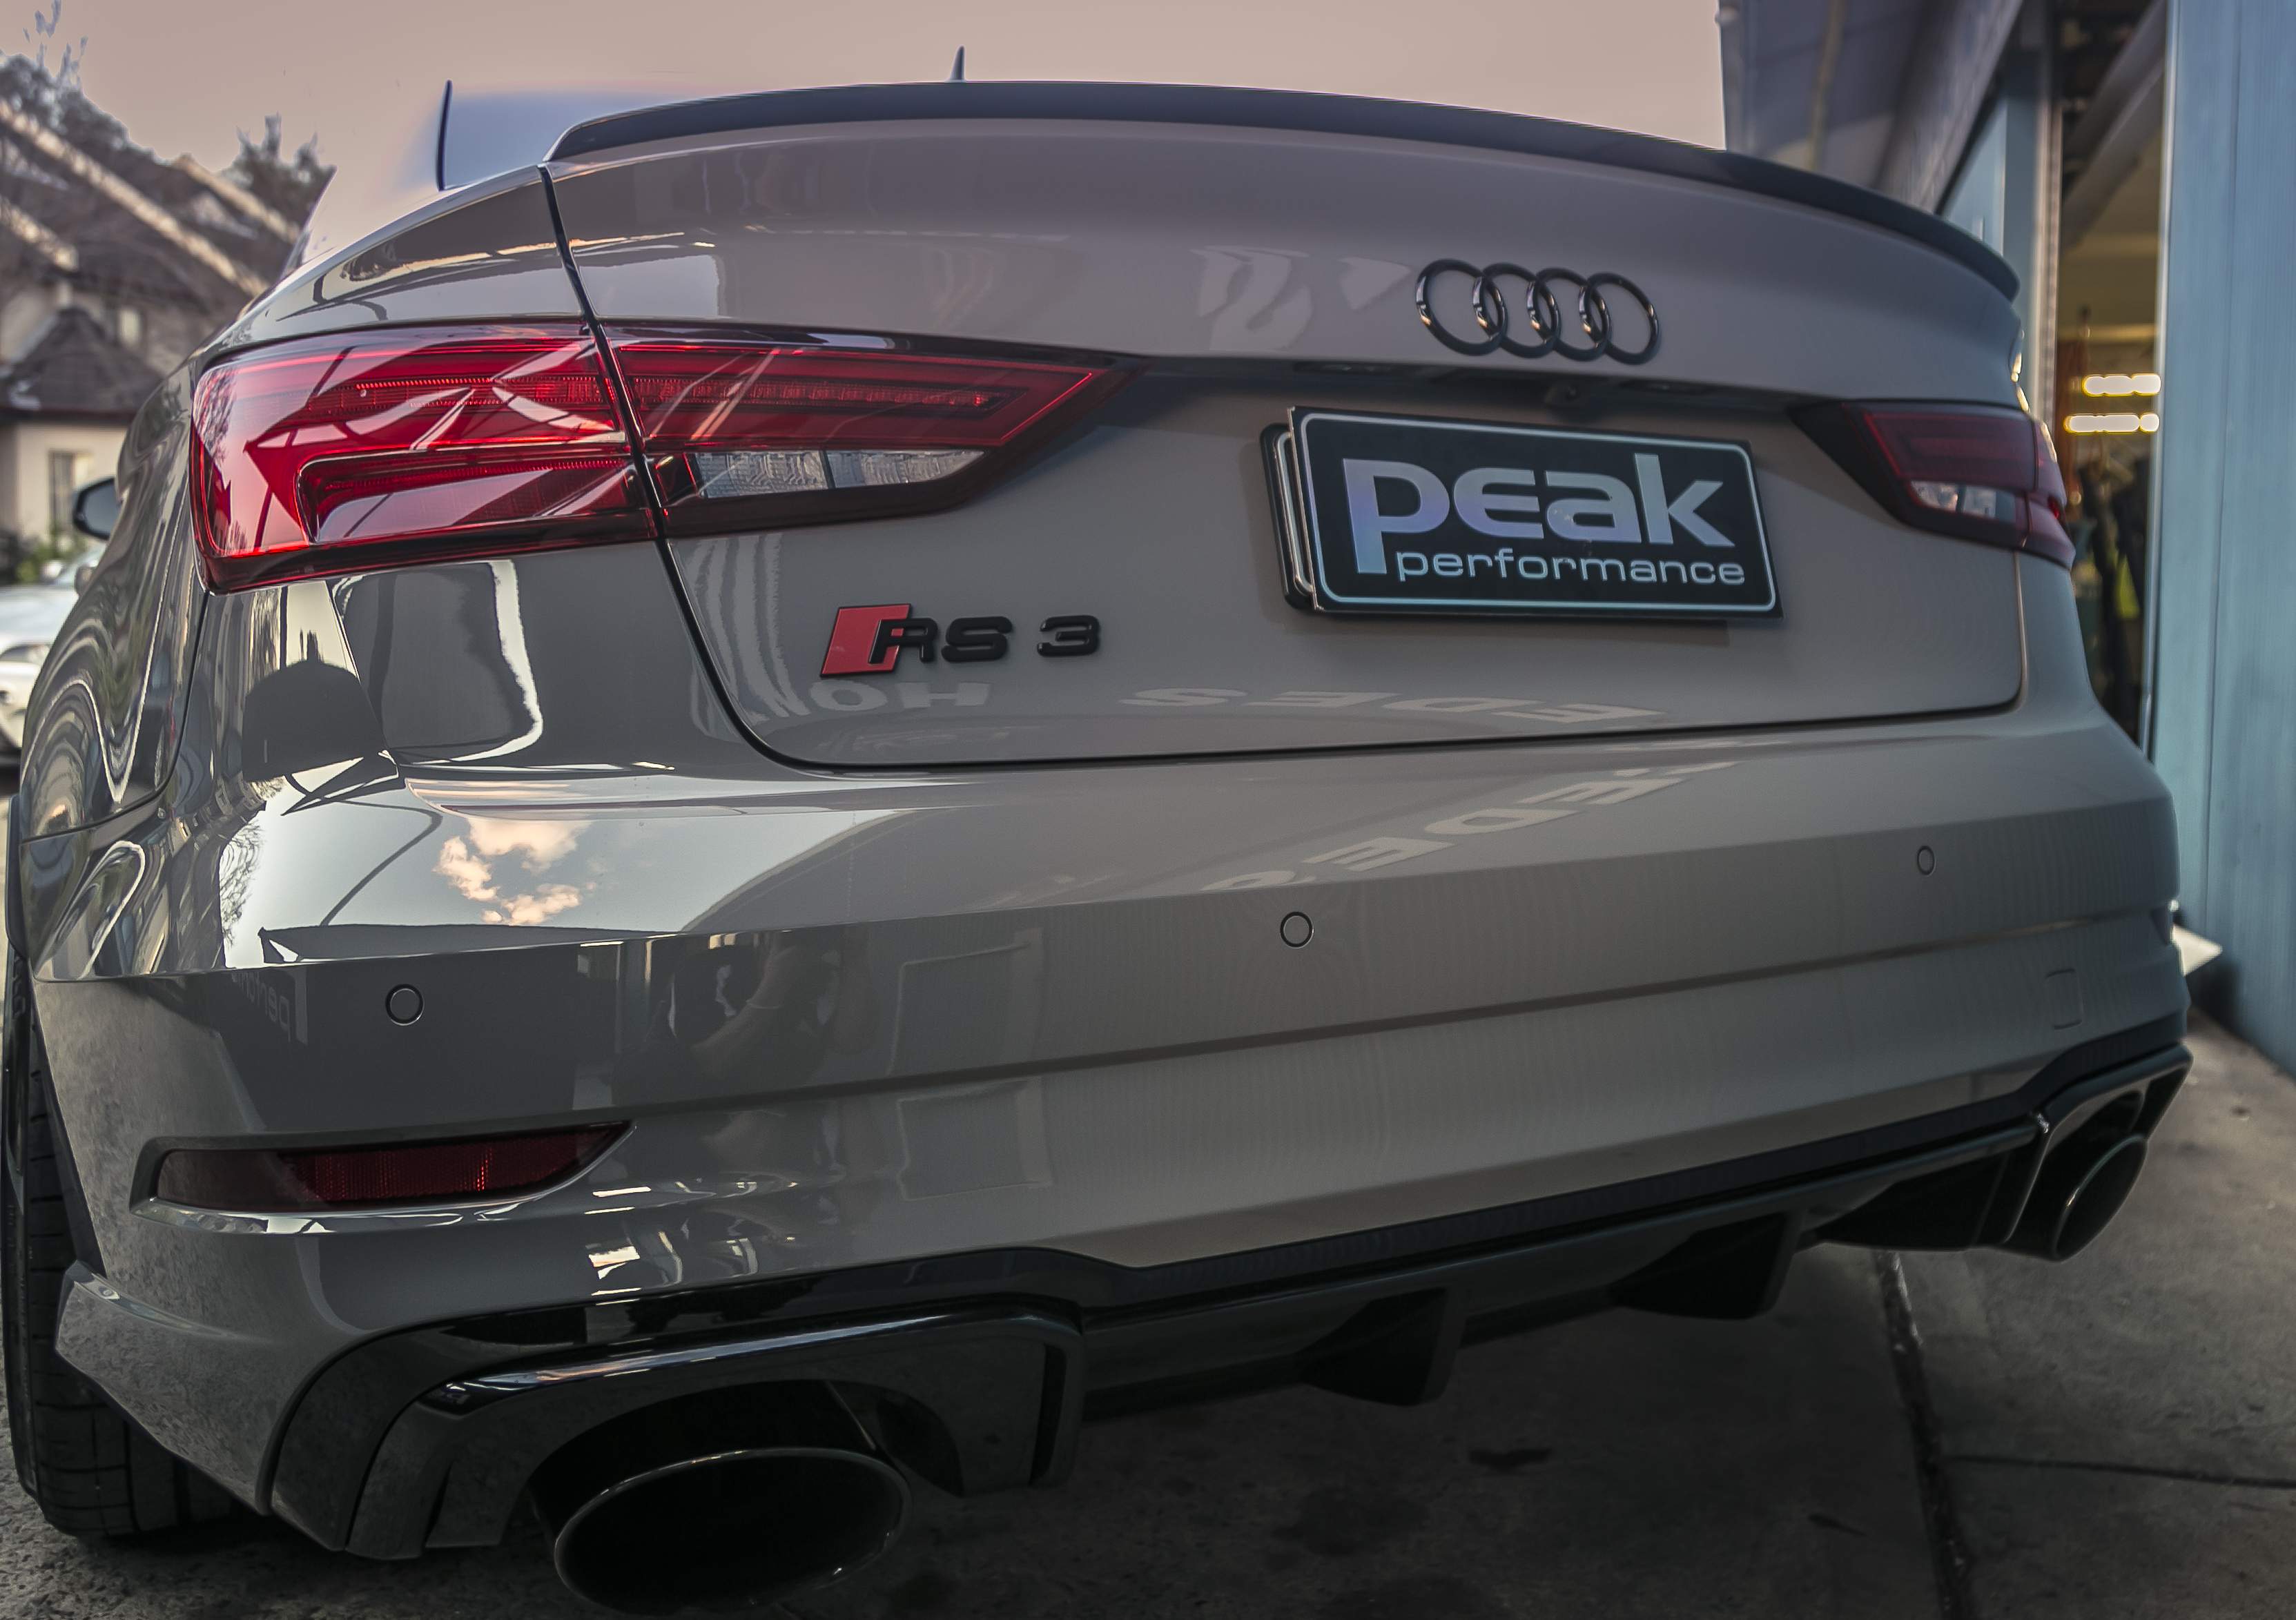 Audi S3 8v Sportback Armytrix Exhaust Mods Best Tuning Review Price